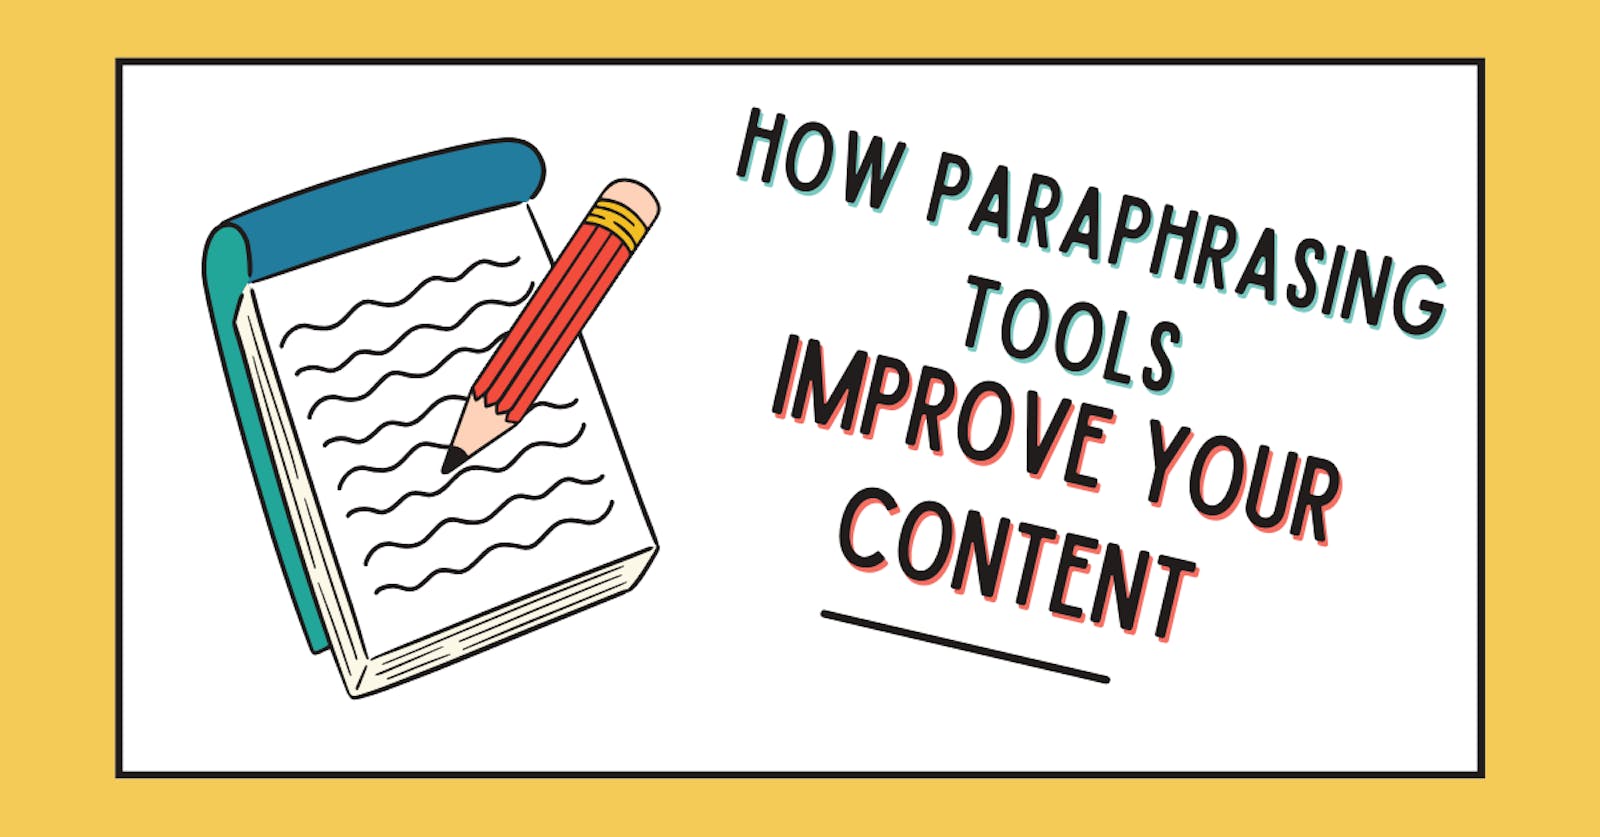 How Paraphrasing Tools Improve Your Content